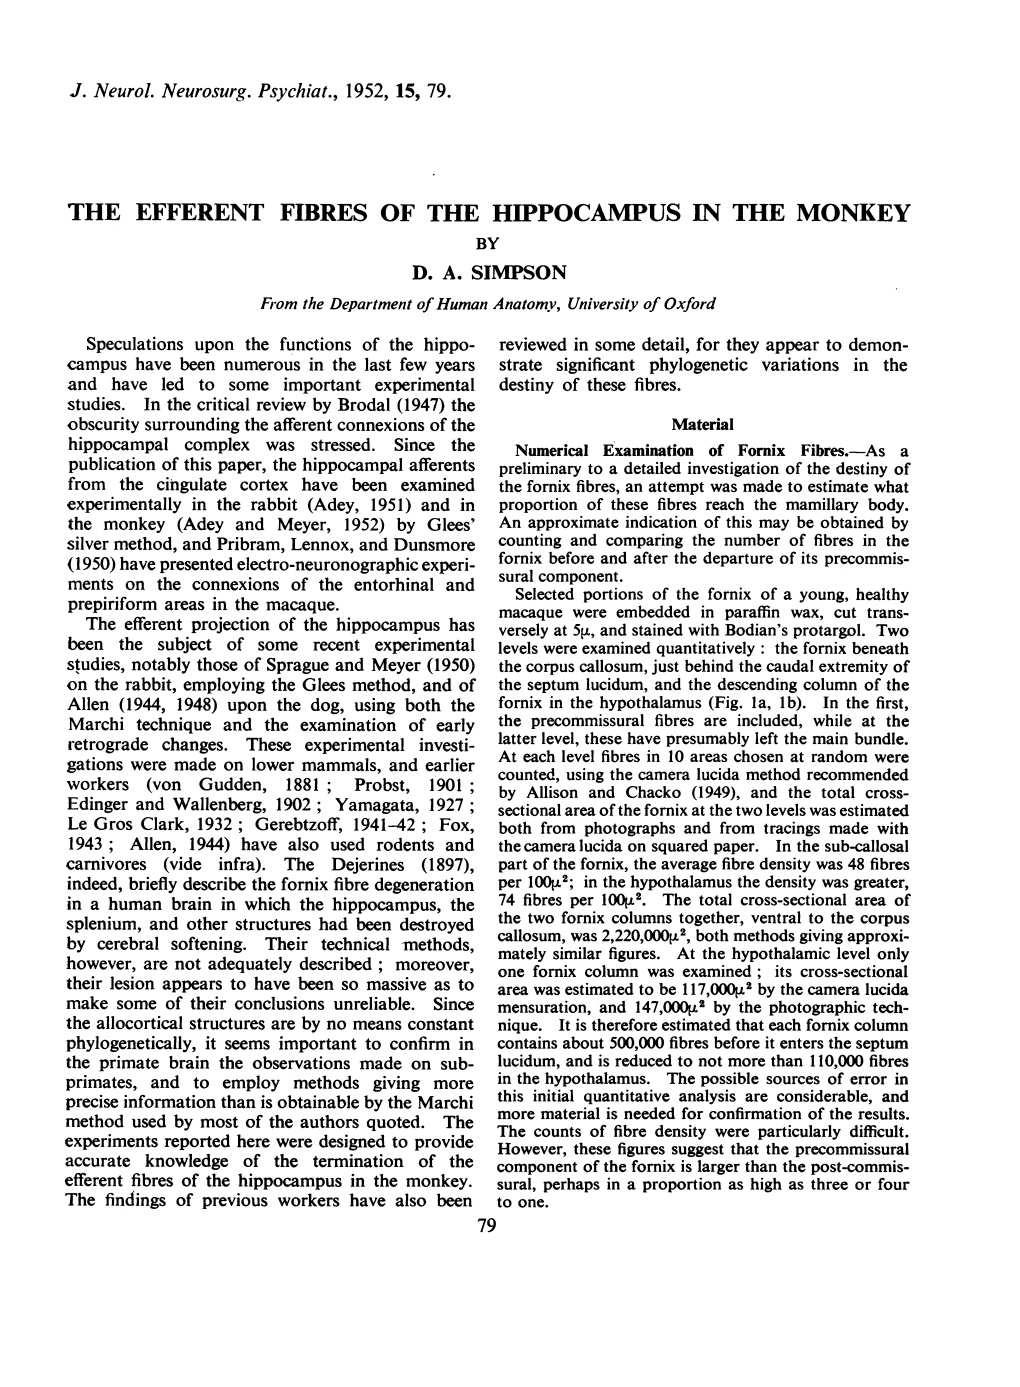 The Efferent Fibres of the Hippocampus in the Monkey by D